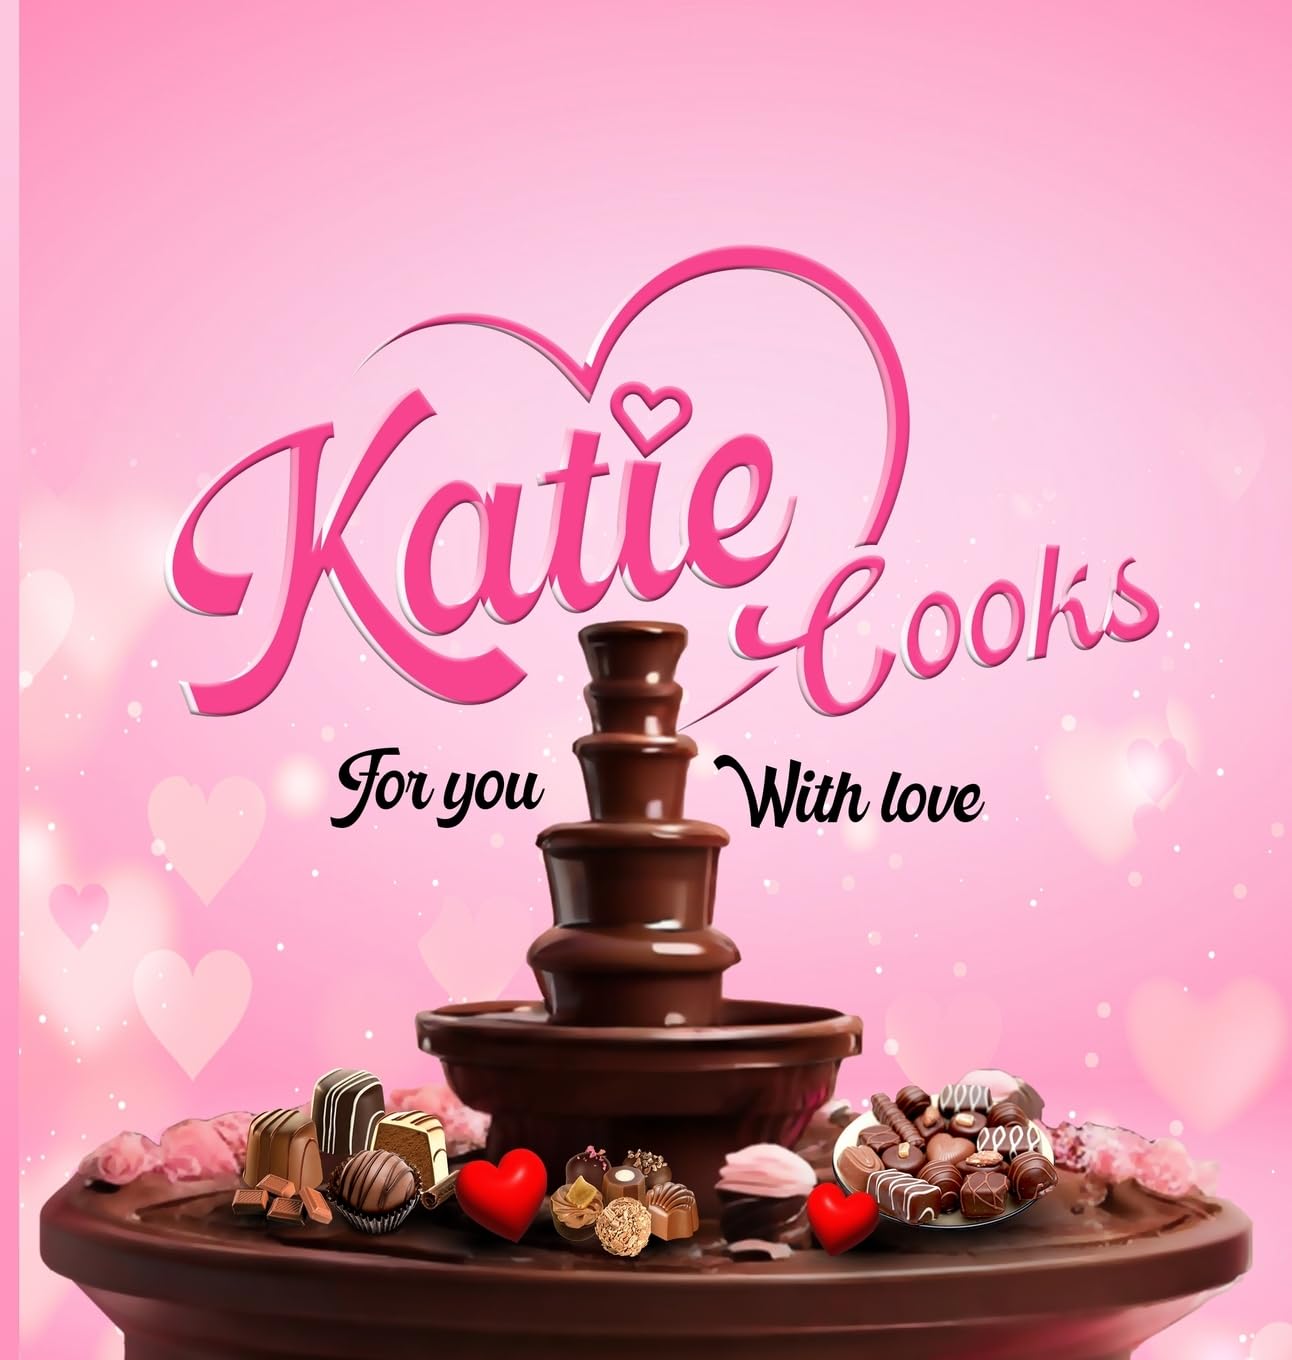 New Cookbook "Katie Cooks for You With Love" Offers Comforting Recipes for Busy Families